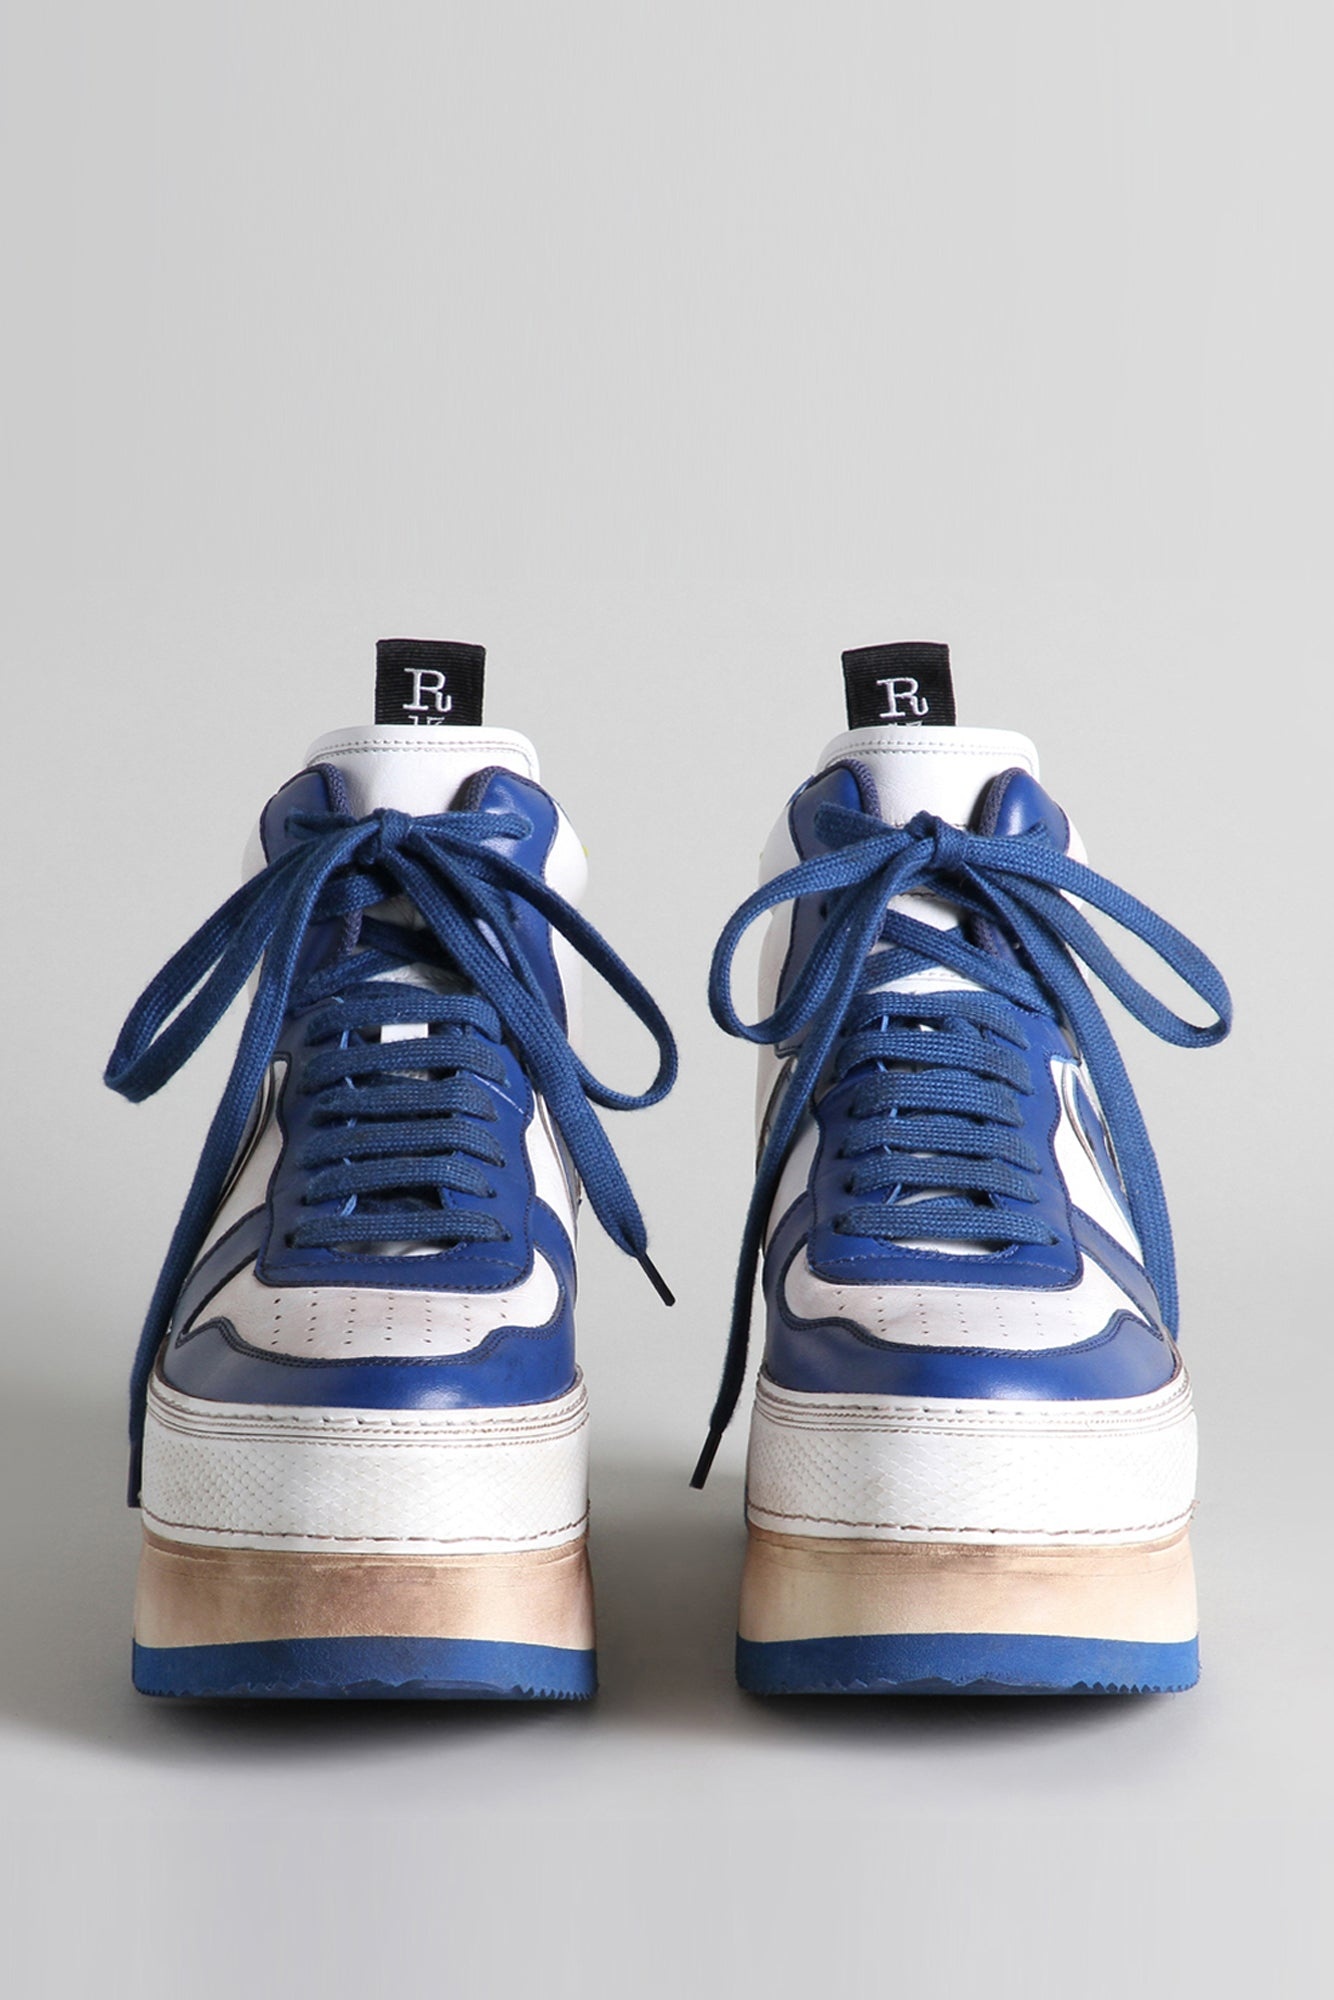 The Riot Leather High Top - Blue and White | R13 Denim Official Site - 2